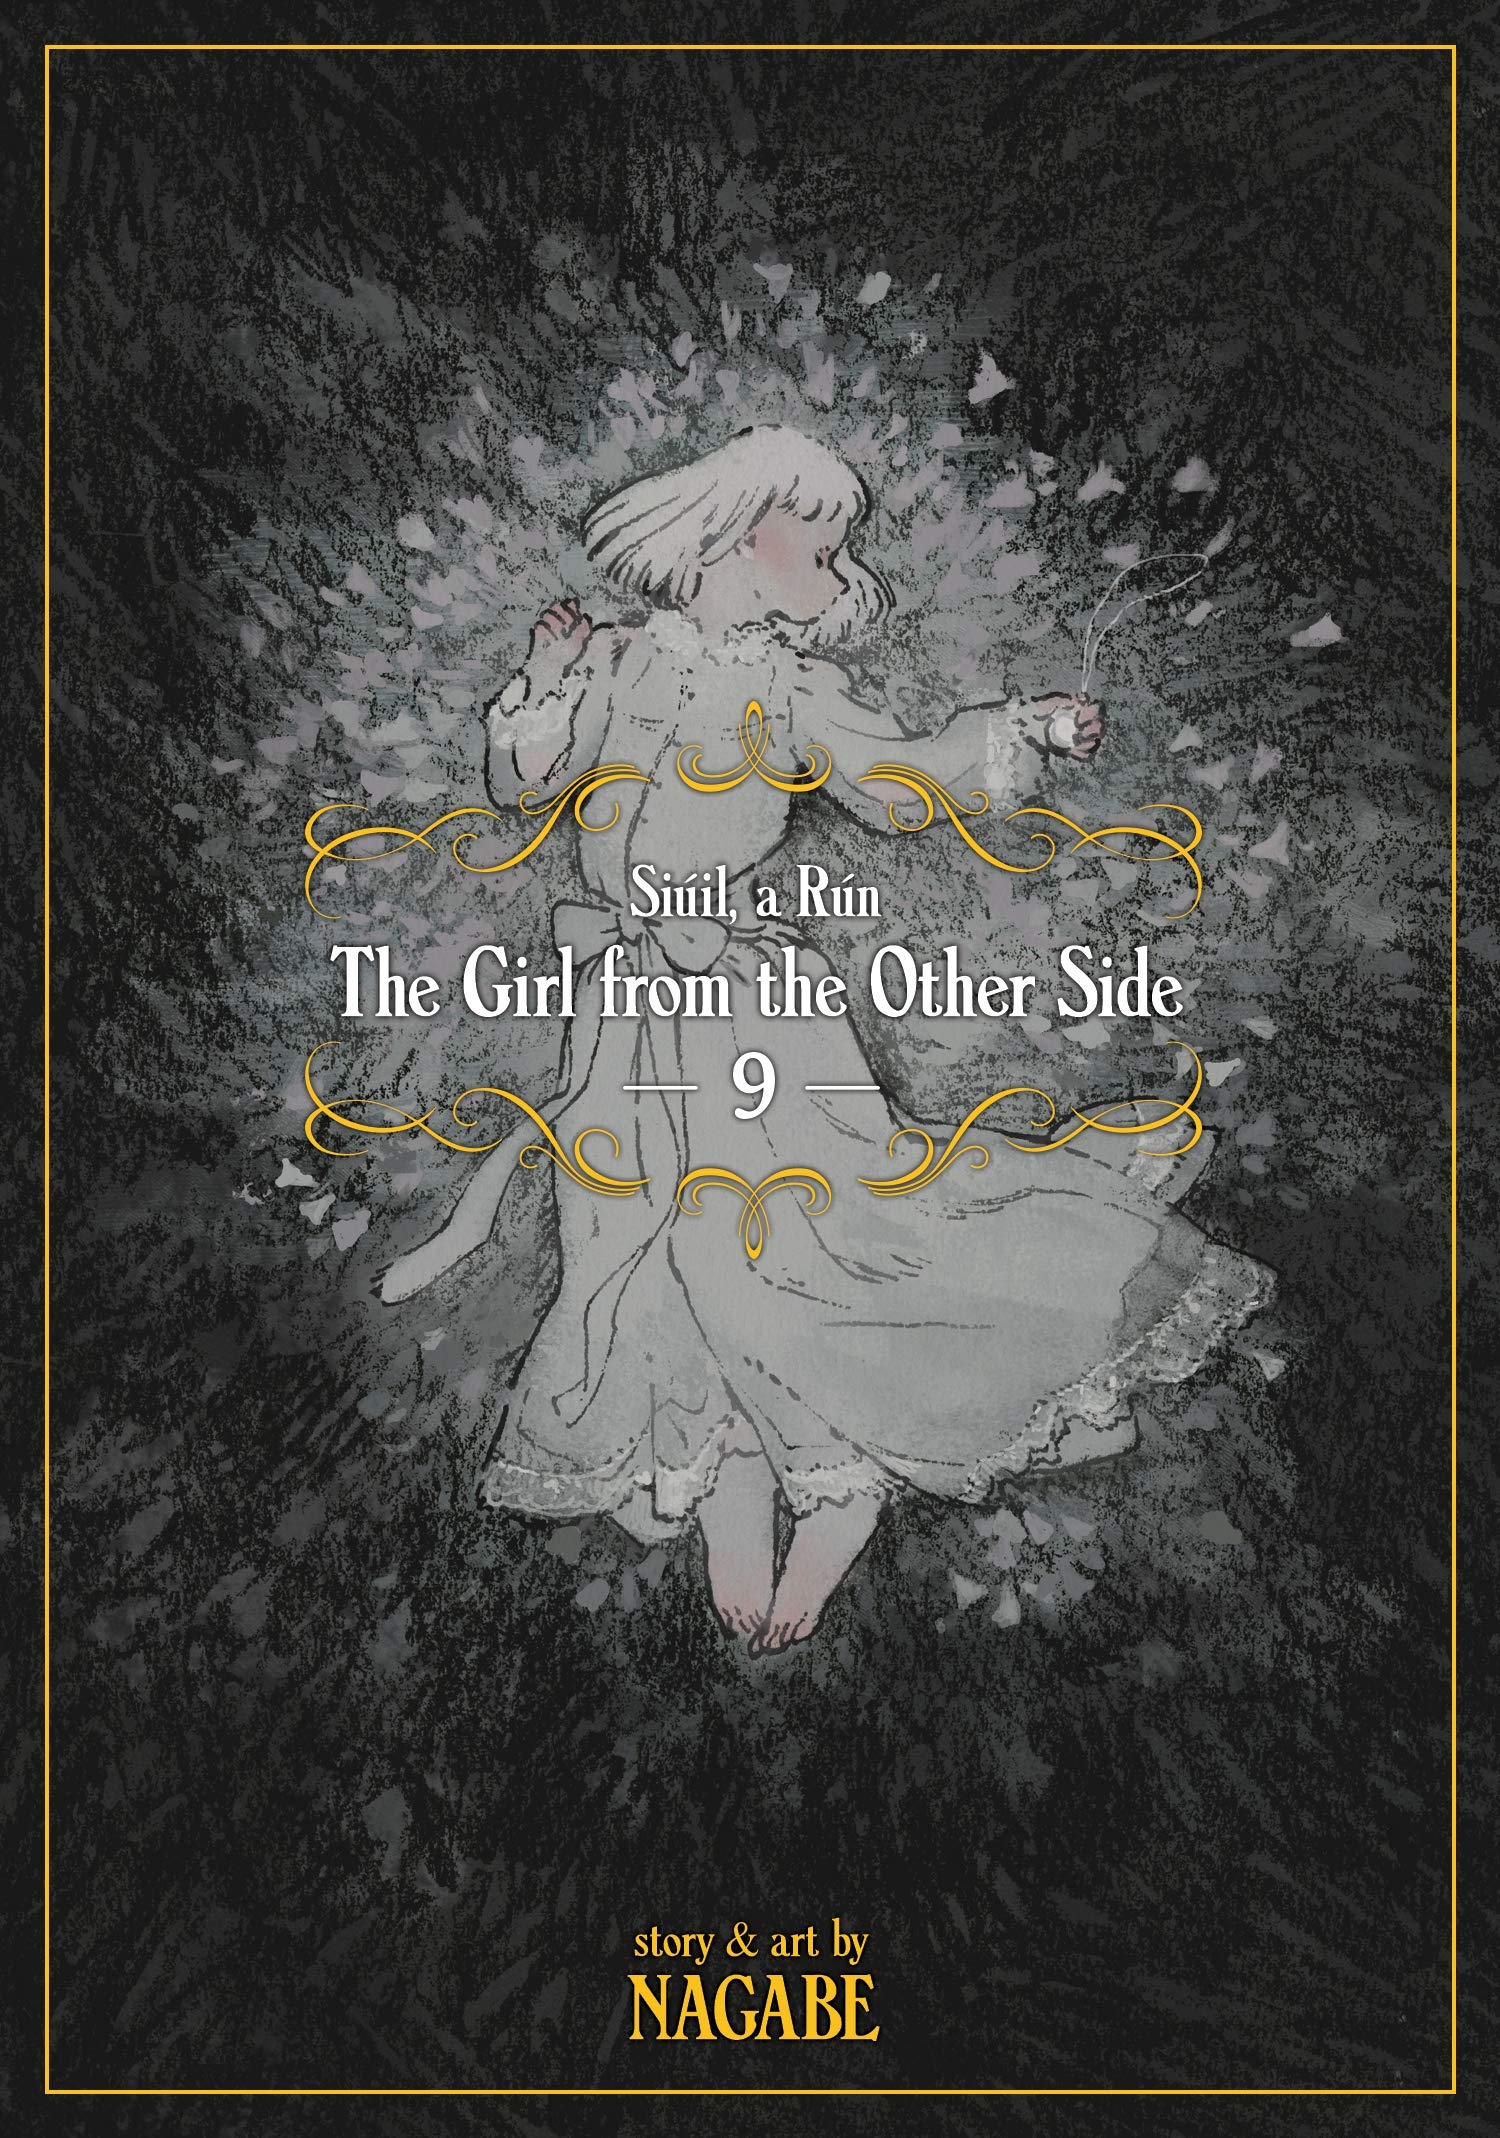 The Girl from the Other Side: Siuil, a Run. Volume 9